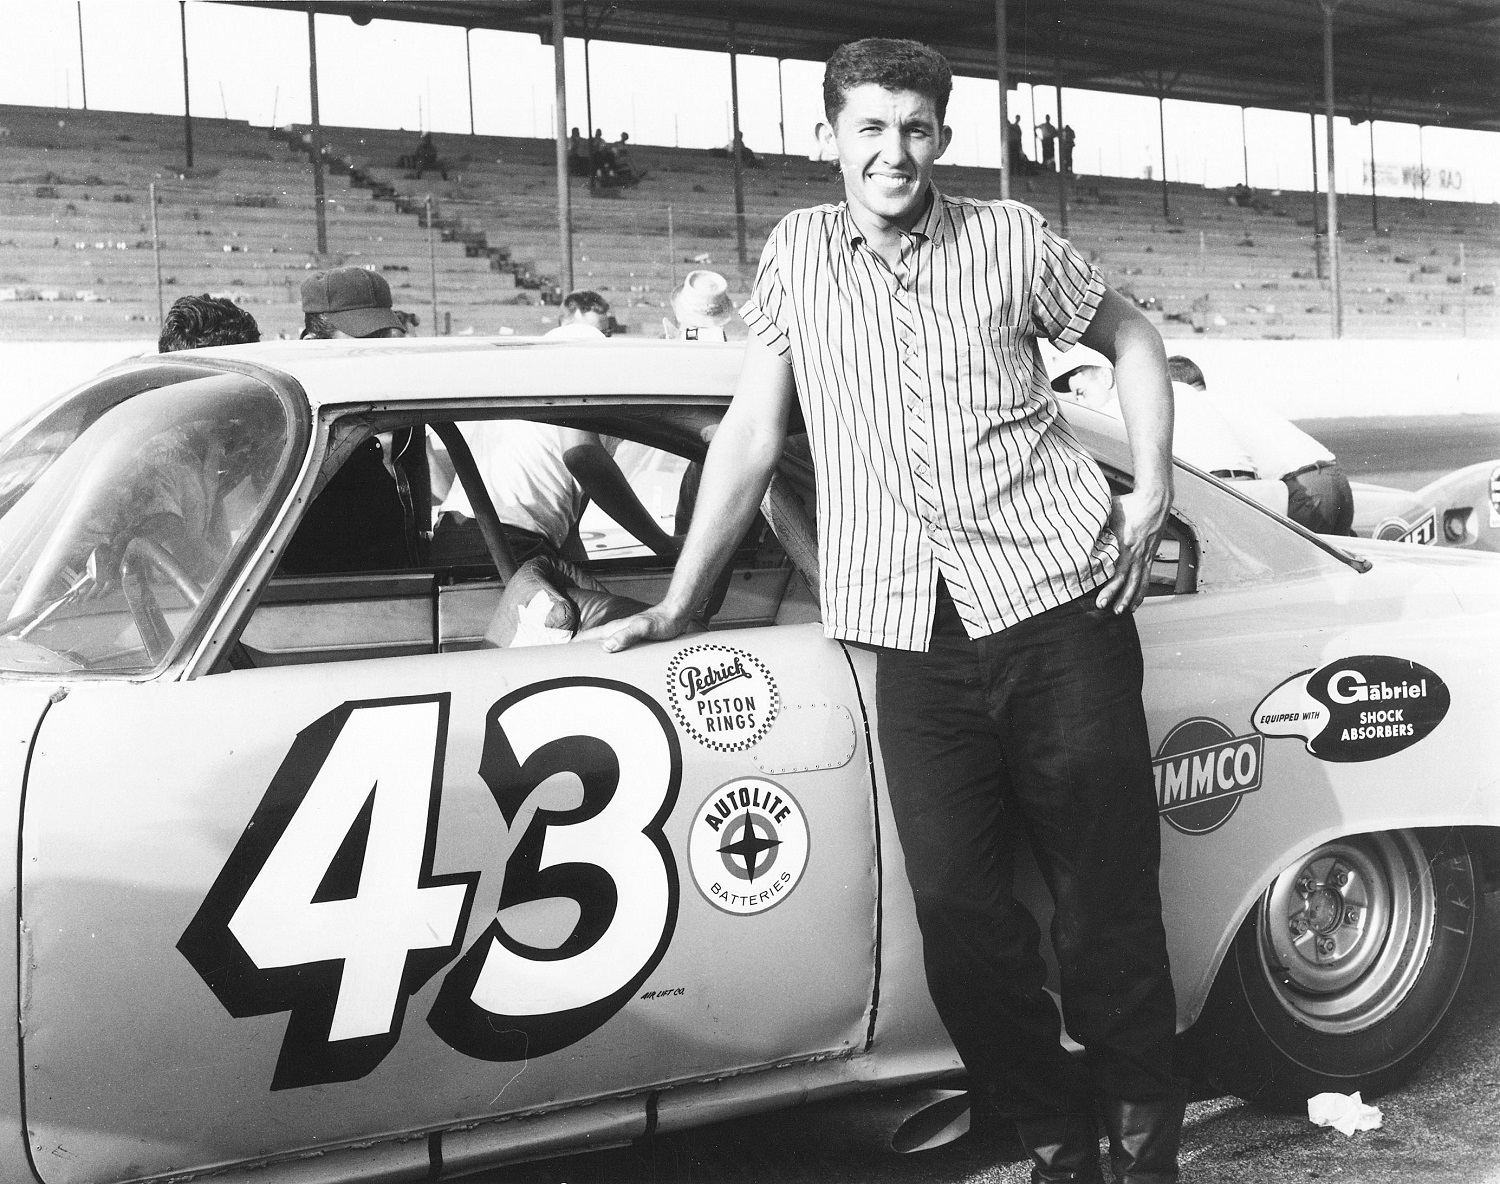 Richard Petty finished sixth in the Southern 500 at Darlington in 1960 in his PLymouth Fury.